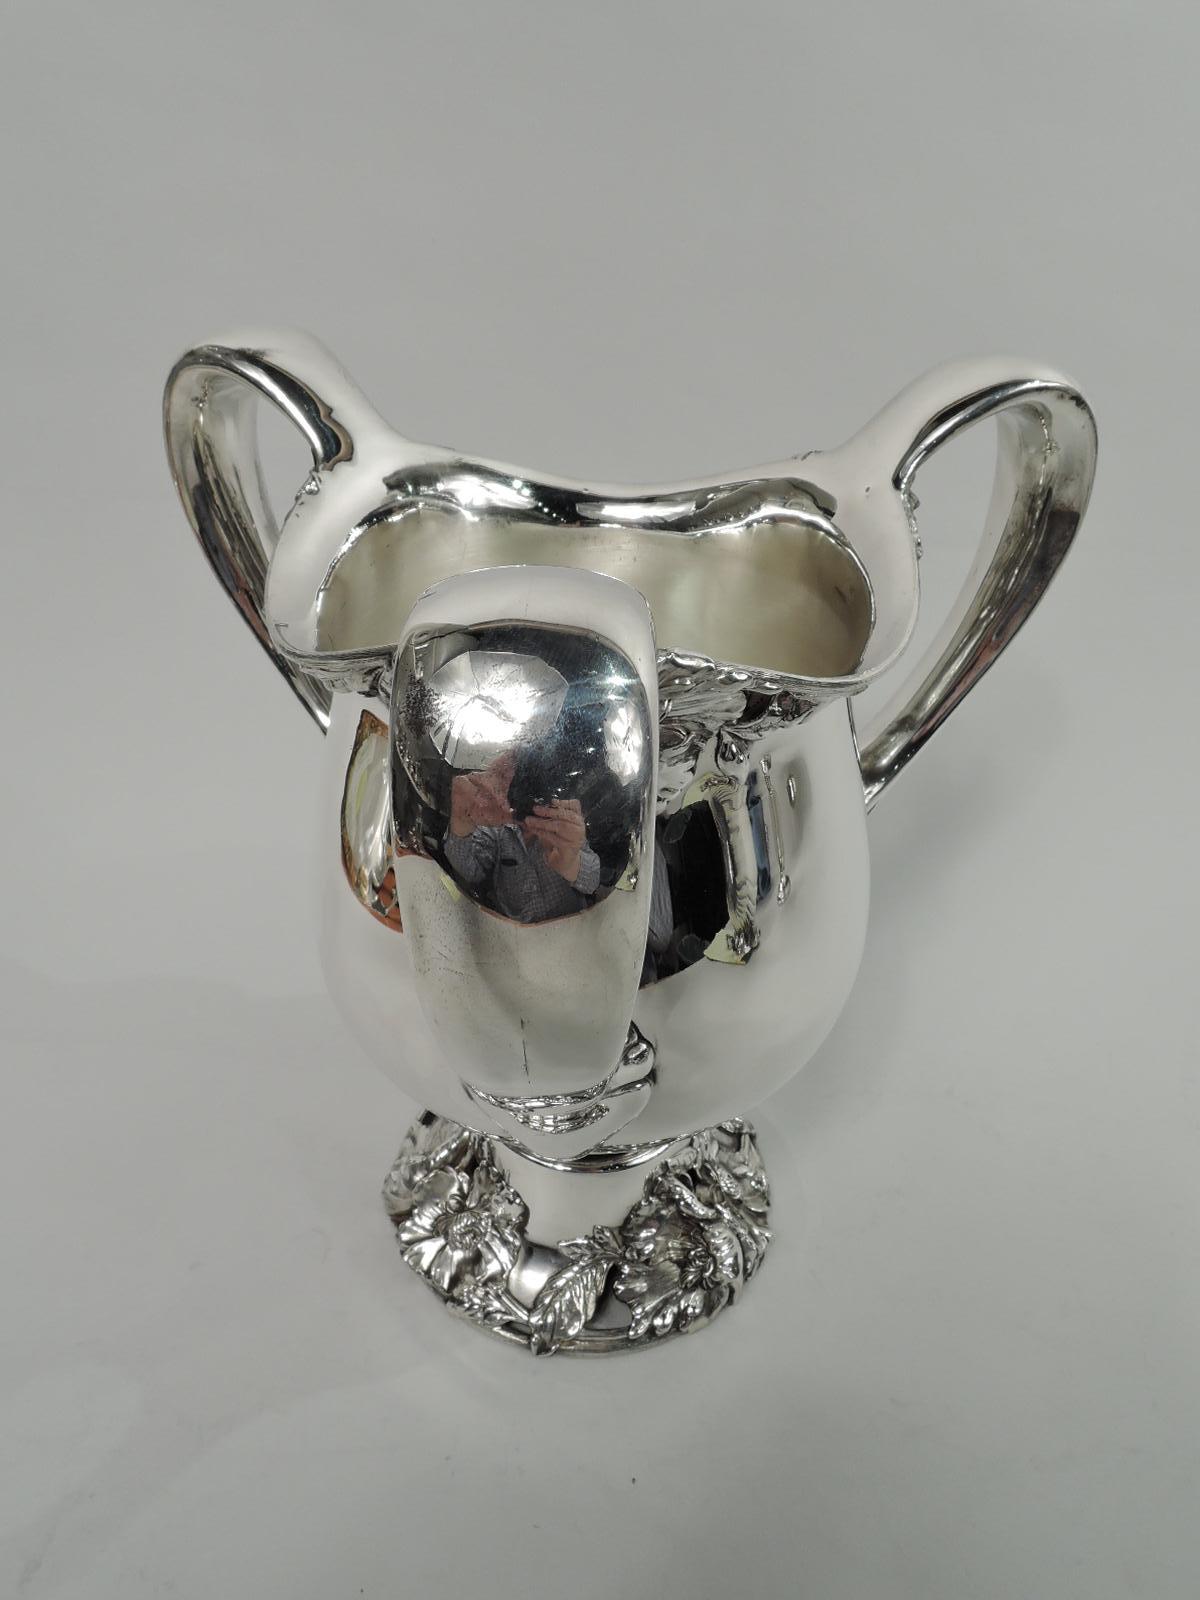 Turn-of-the-century Art Nouveau sterling silver loving cup. Made by Frank W. Smith in Gardner, Mass. Curved body with 3 high-looping handles and domed foot. Flower heads clustered at rim under handles. Foot same with openwork. Fresh and voluptuous